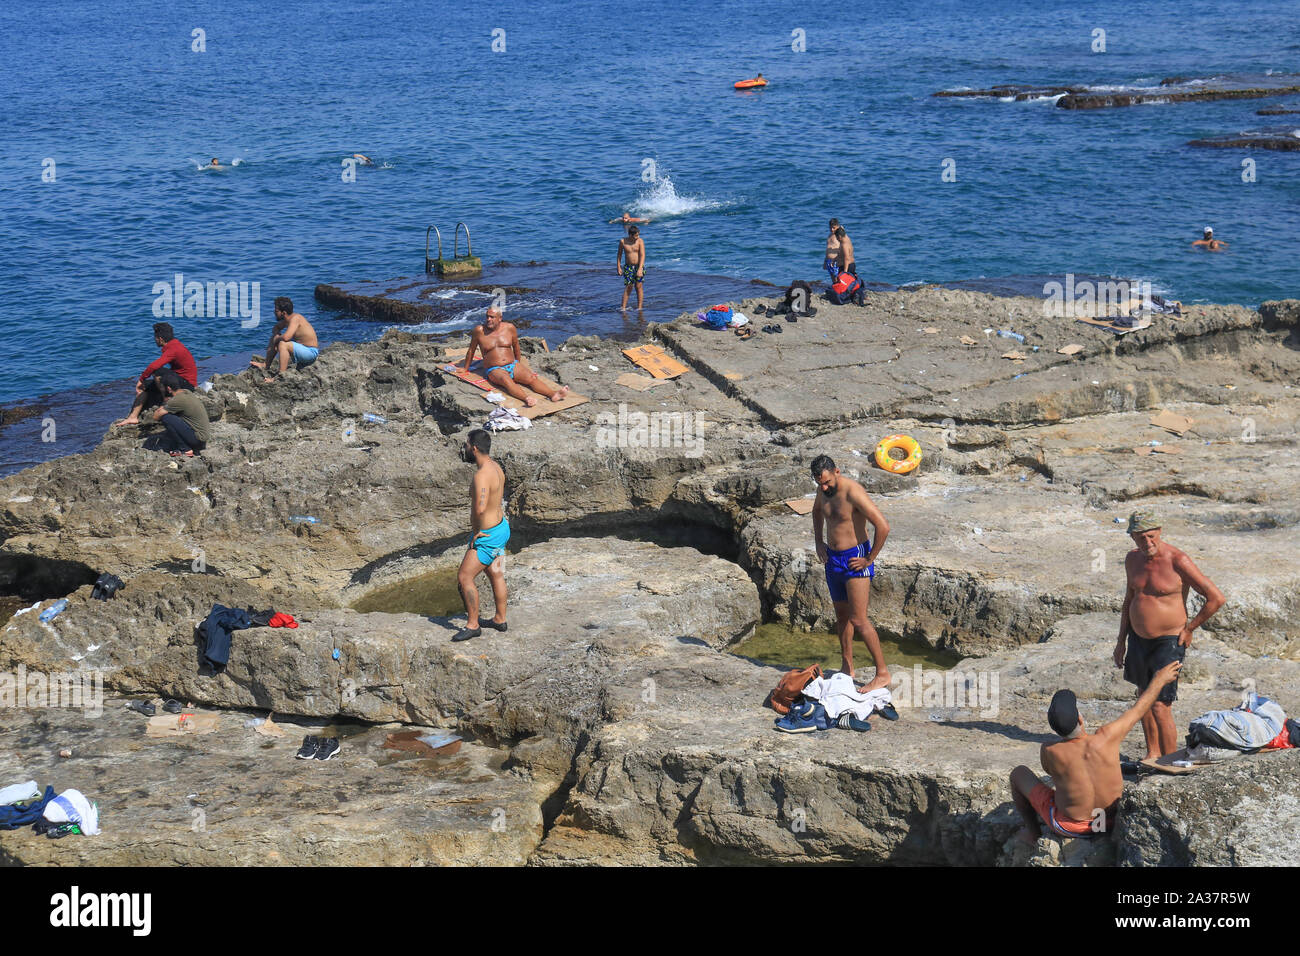 October 6, 2019, Beirut, Lebanon: People at the rocky seafront of the sea during the hot and humid day in Beirut. (Credit Image: © Amer Ghazzal/SOPA Images via ZUMA Wire) Stock Photo